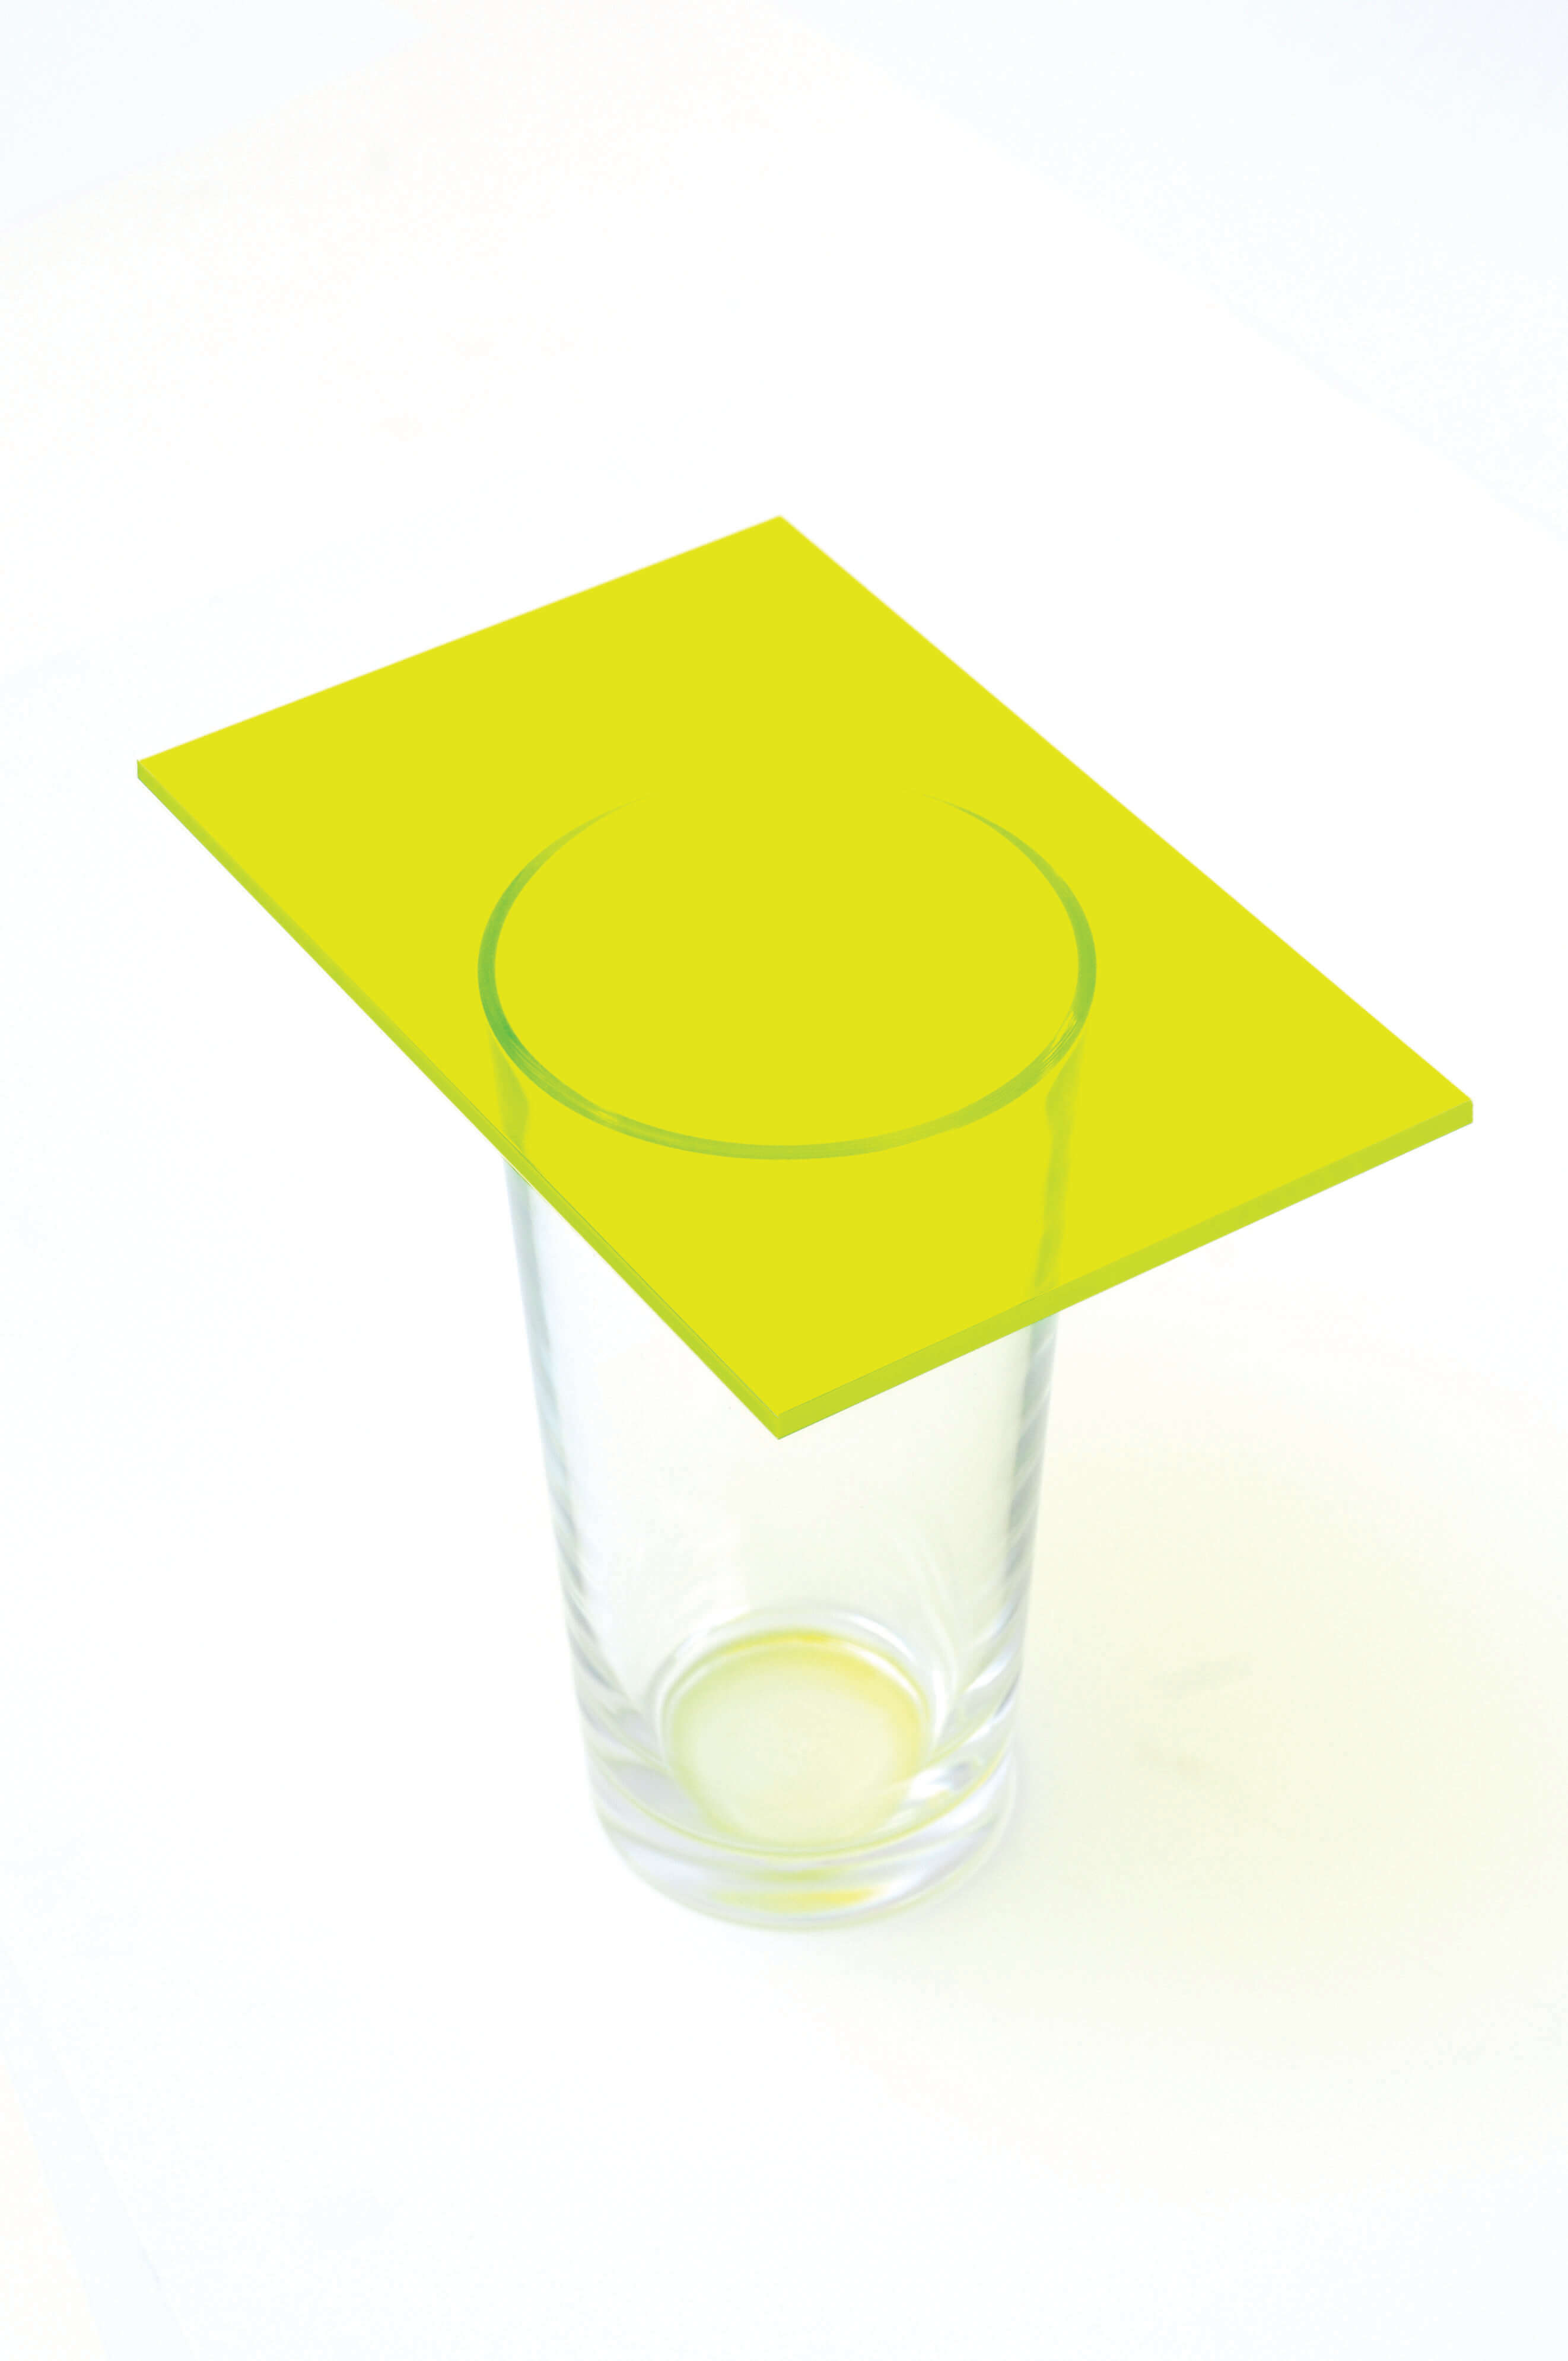 Tinted Cast Acrylic 3mm Sheet - Yellow 1000 x 500mm